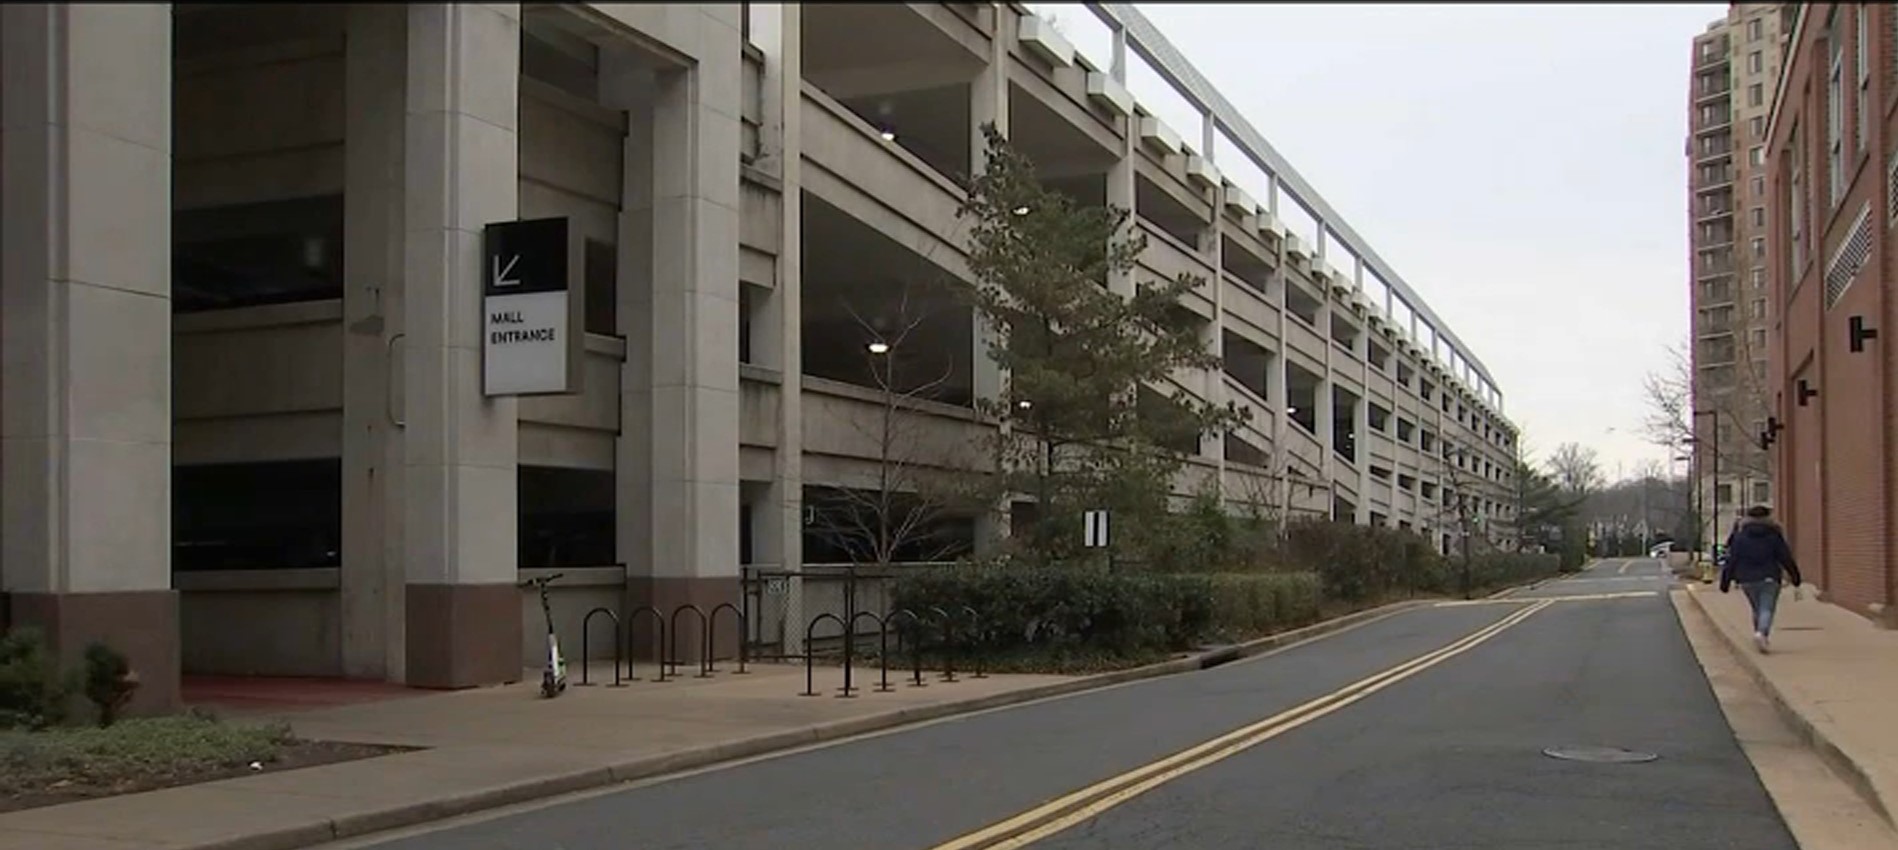 Armed Robberies Leave Pentagon City Mall Shoppers on Edge